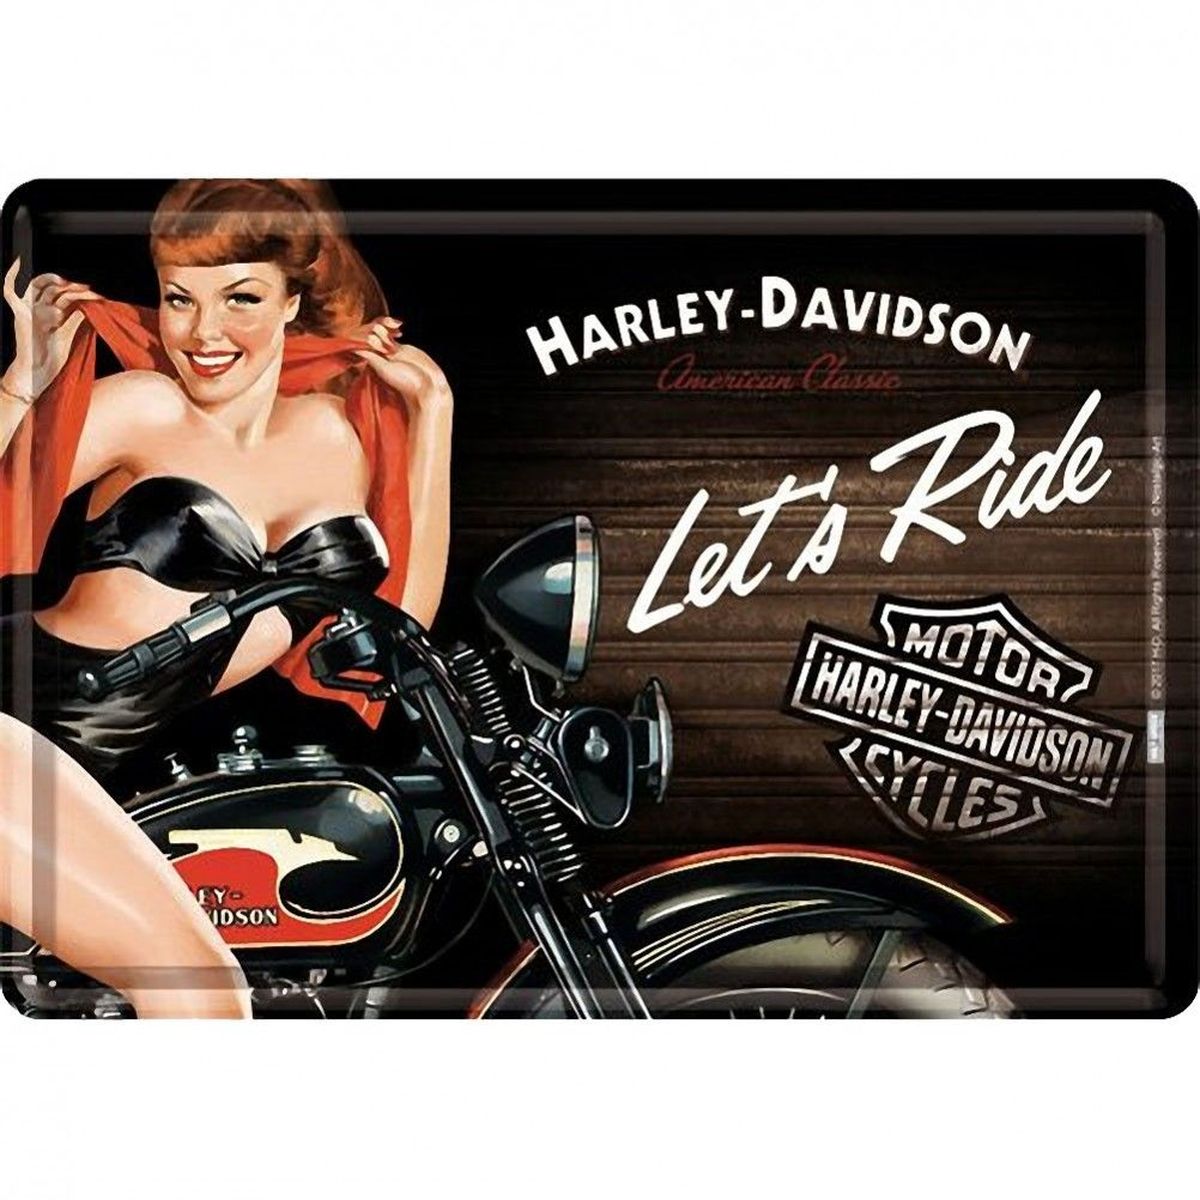 Harley Davidson Let's Ride small metal plate